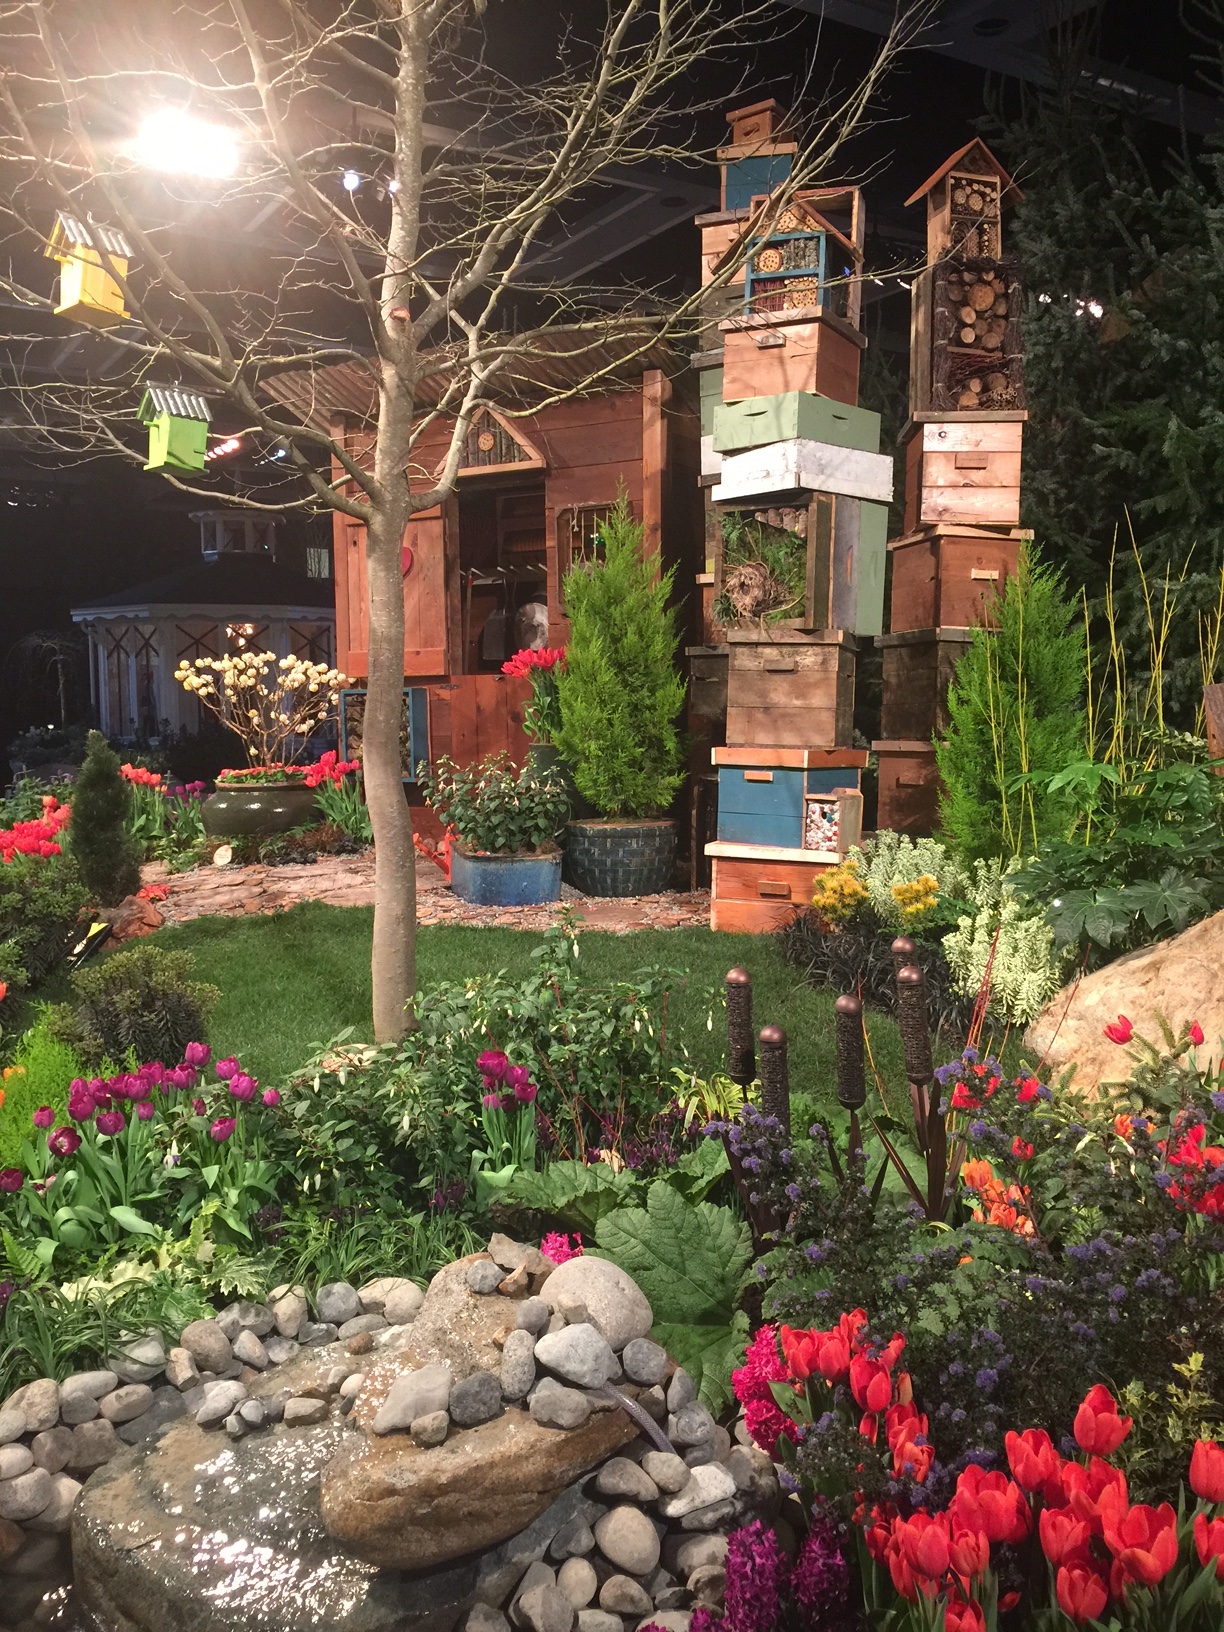 snapshots from the gardens at the northwest flower and garden show